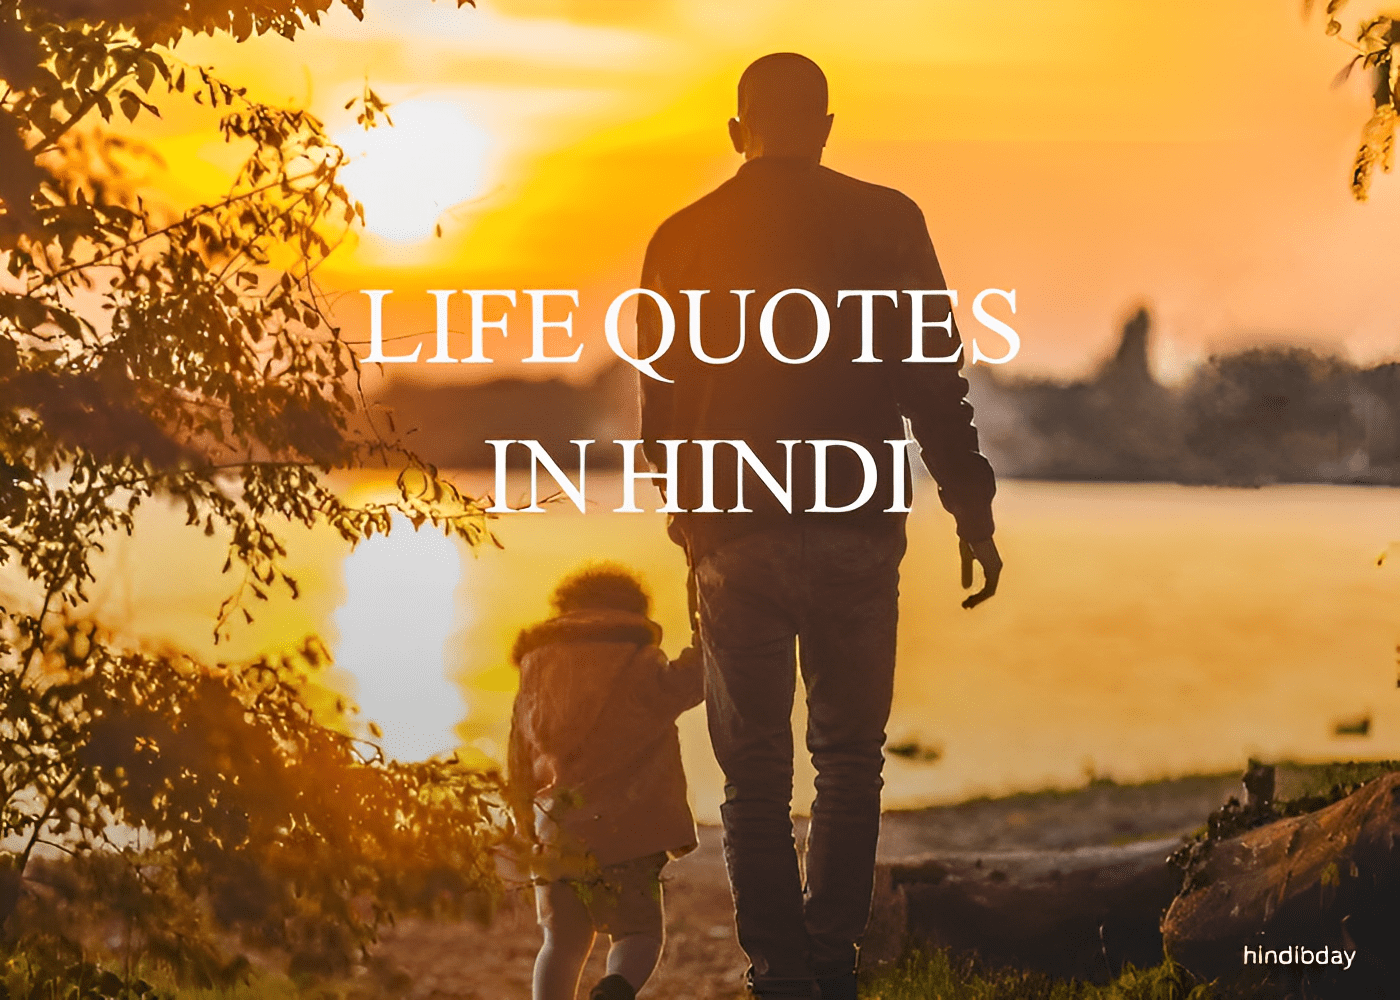 LIFE QUOTES IN HINDI